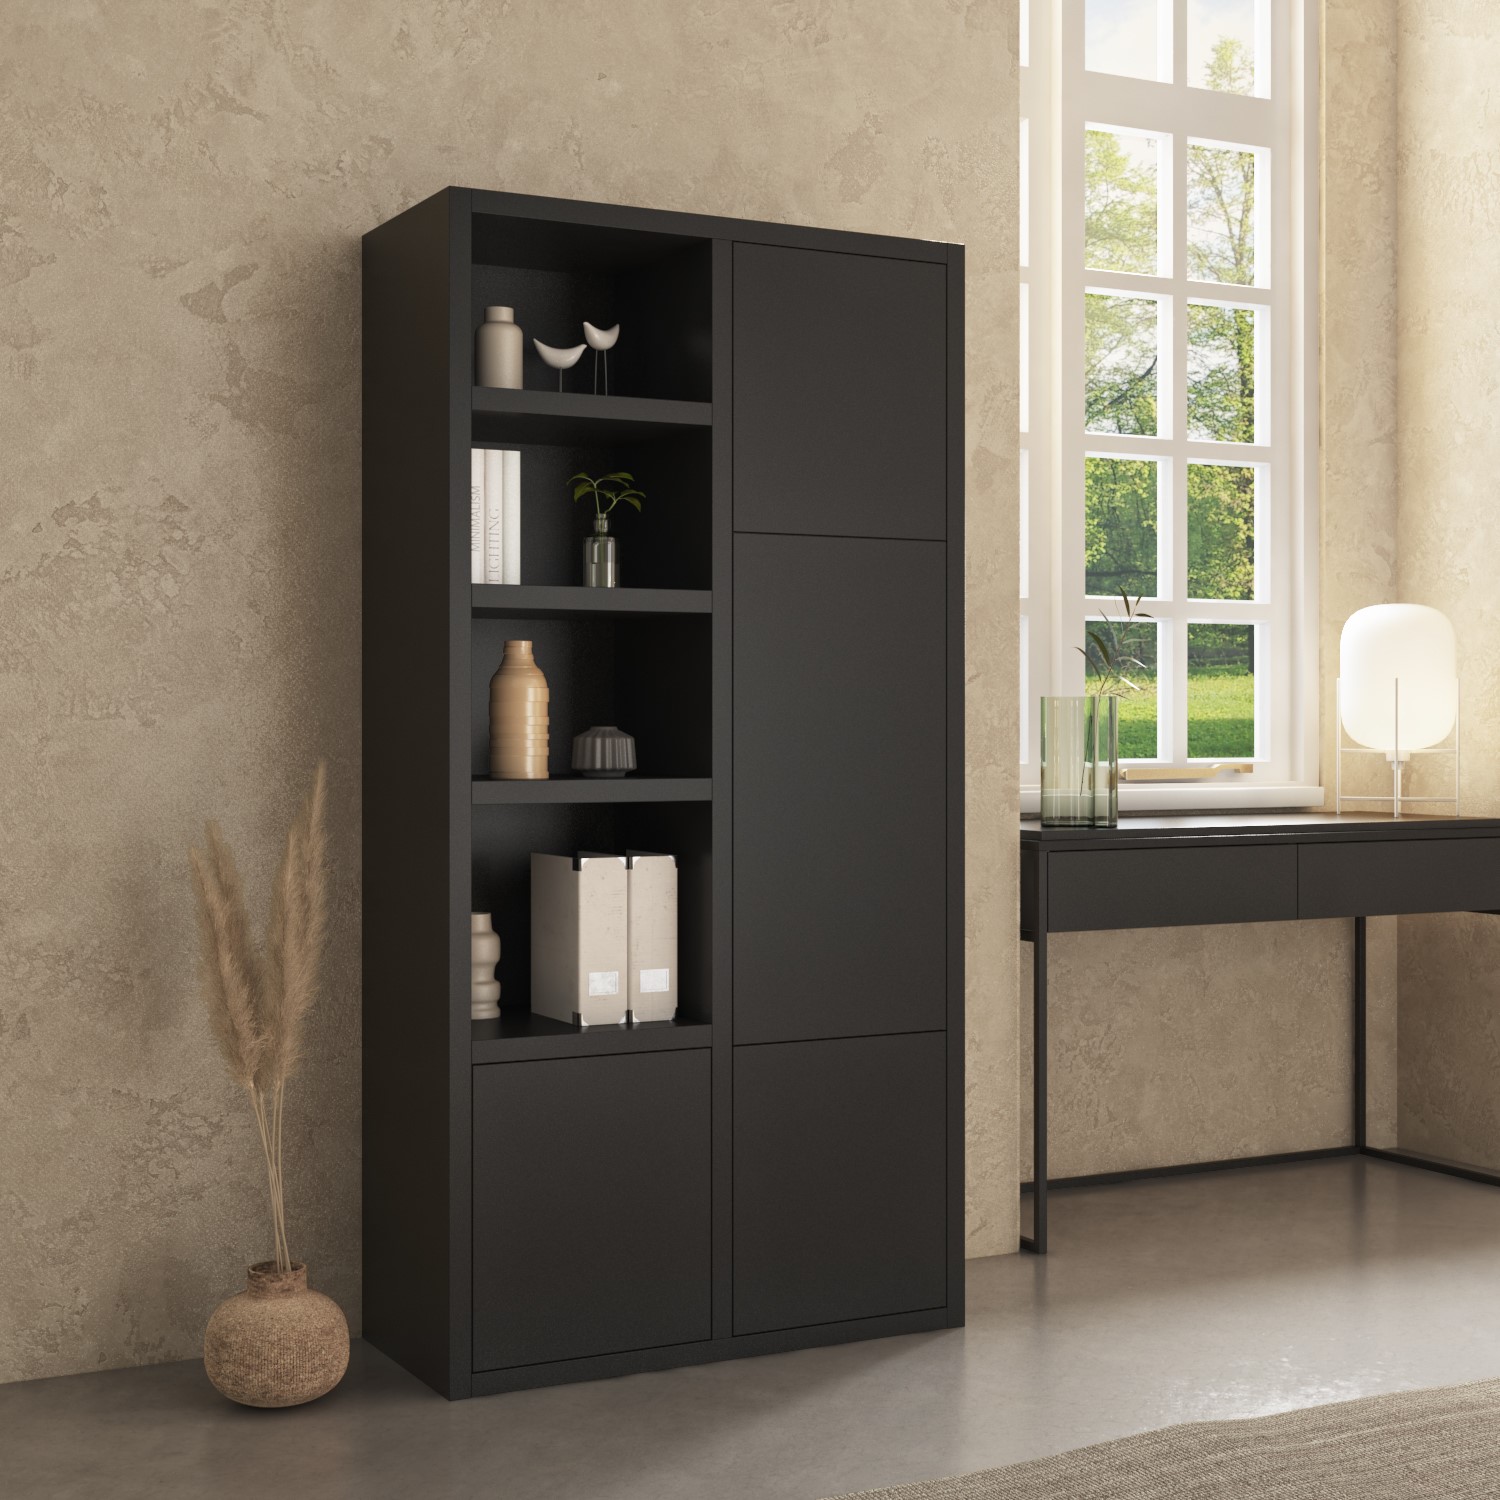 Read more about Tall matt black wooden office bookcase with shelving and cupboards larsen